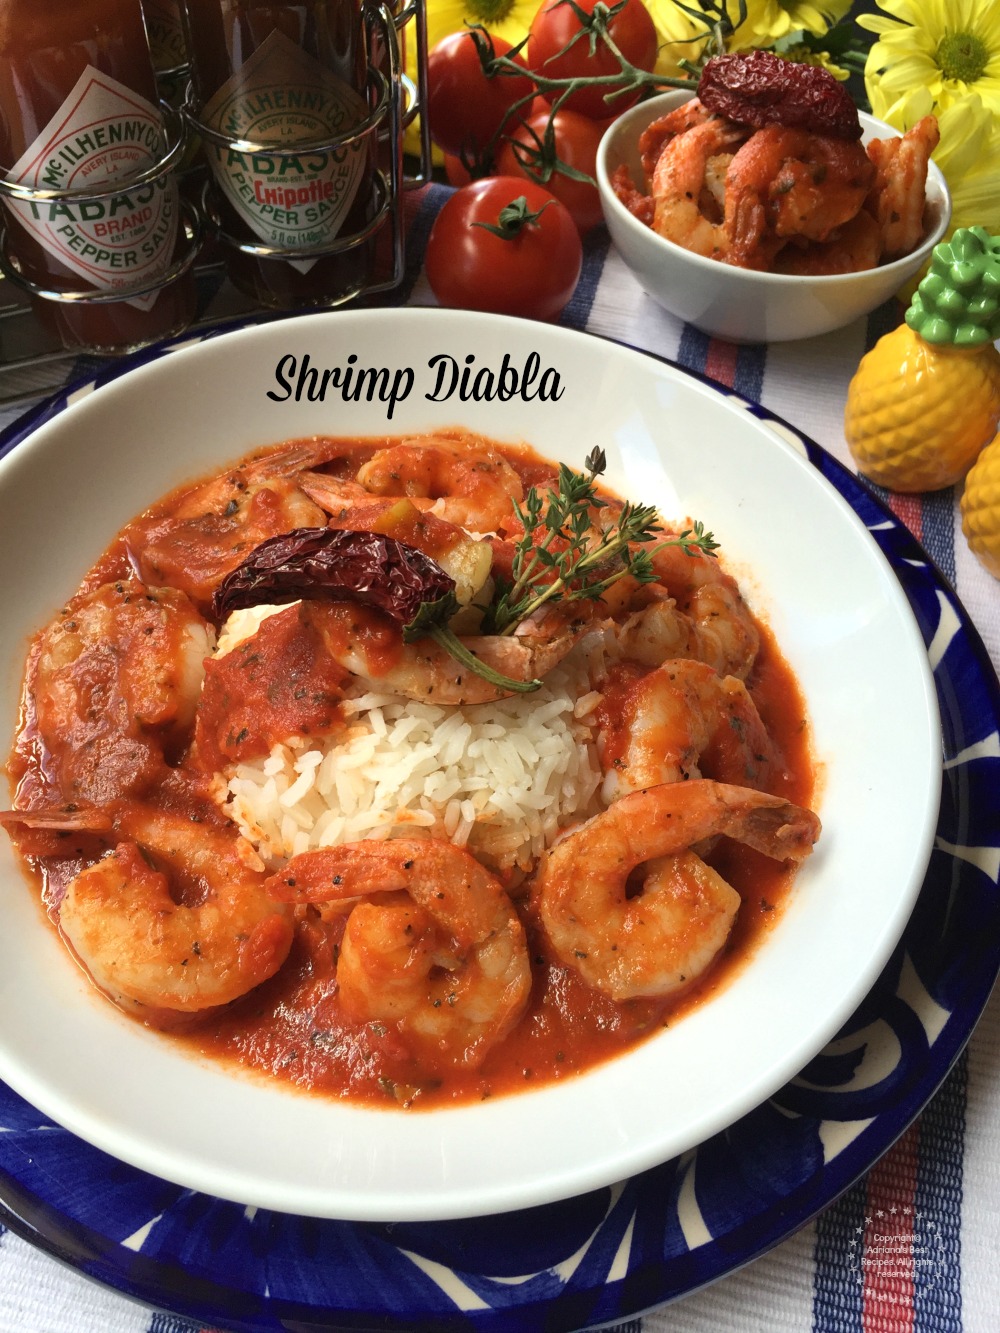 Shrimp Diabla made with tomato sauce, Mexican spices, garlic and TABASCO chipotle sauce